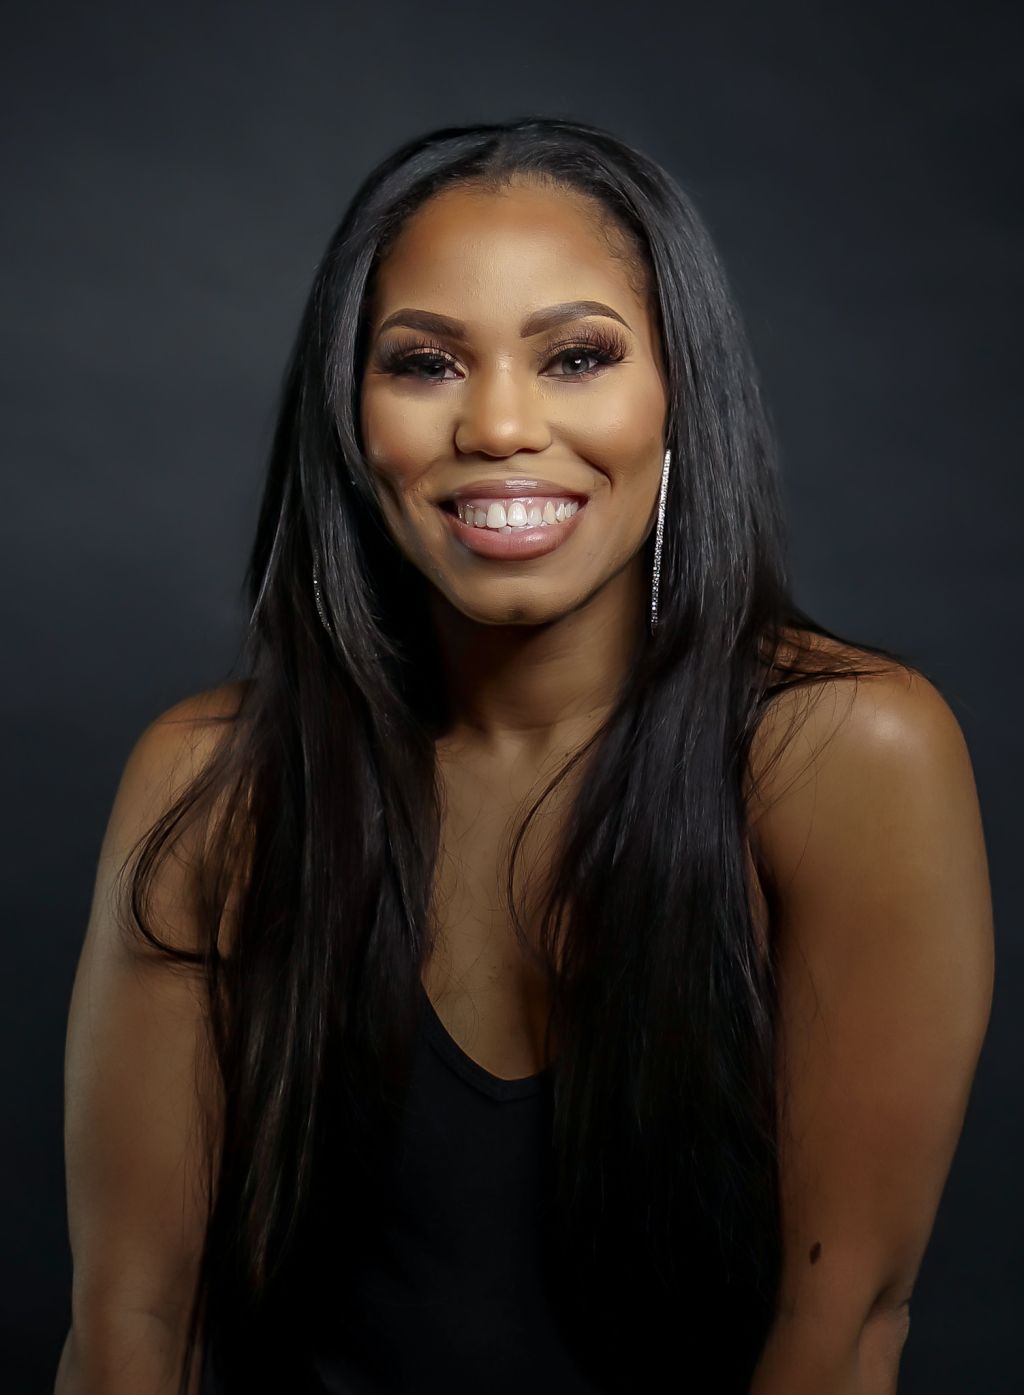 Jackie Paige Joins Atlanta’s MAJIC 107.5/97.5 as the new Midday Personality